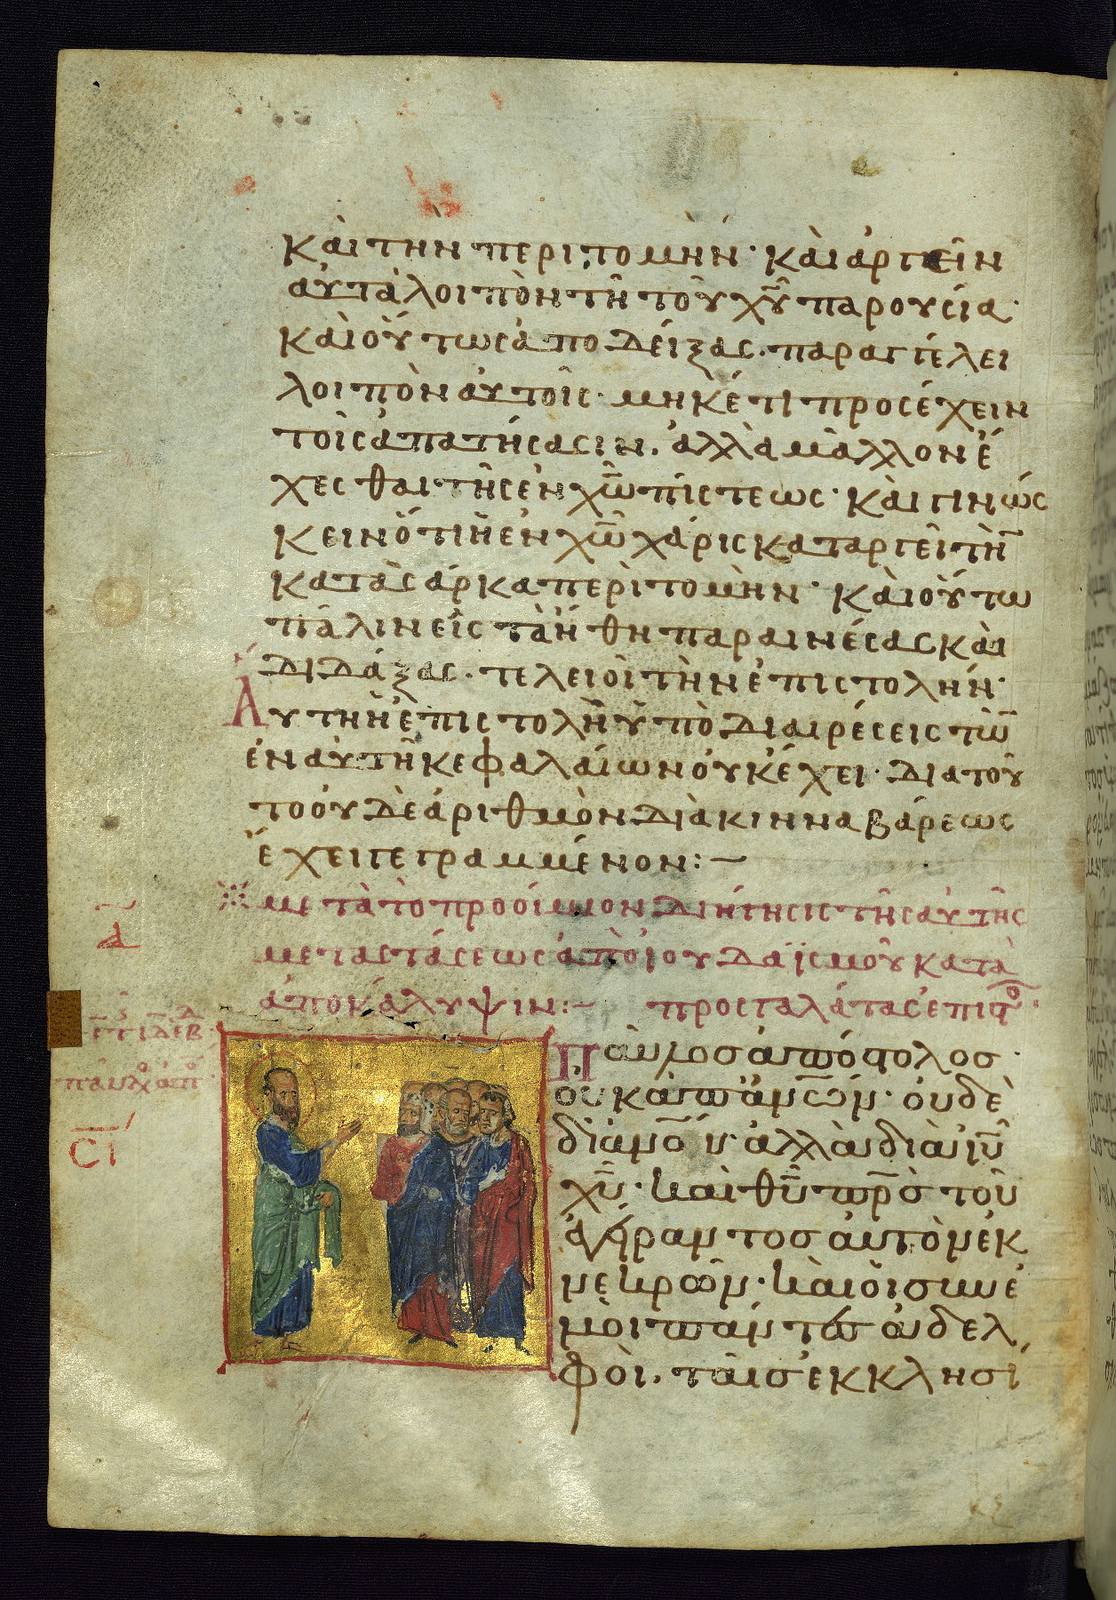 Acts and Epistles, Title page of the Epistle to the Galatians, Walters Manuscript W.533, fol. 216v